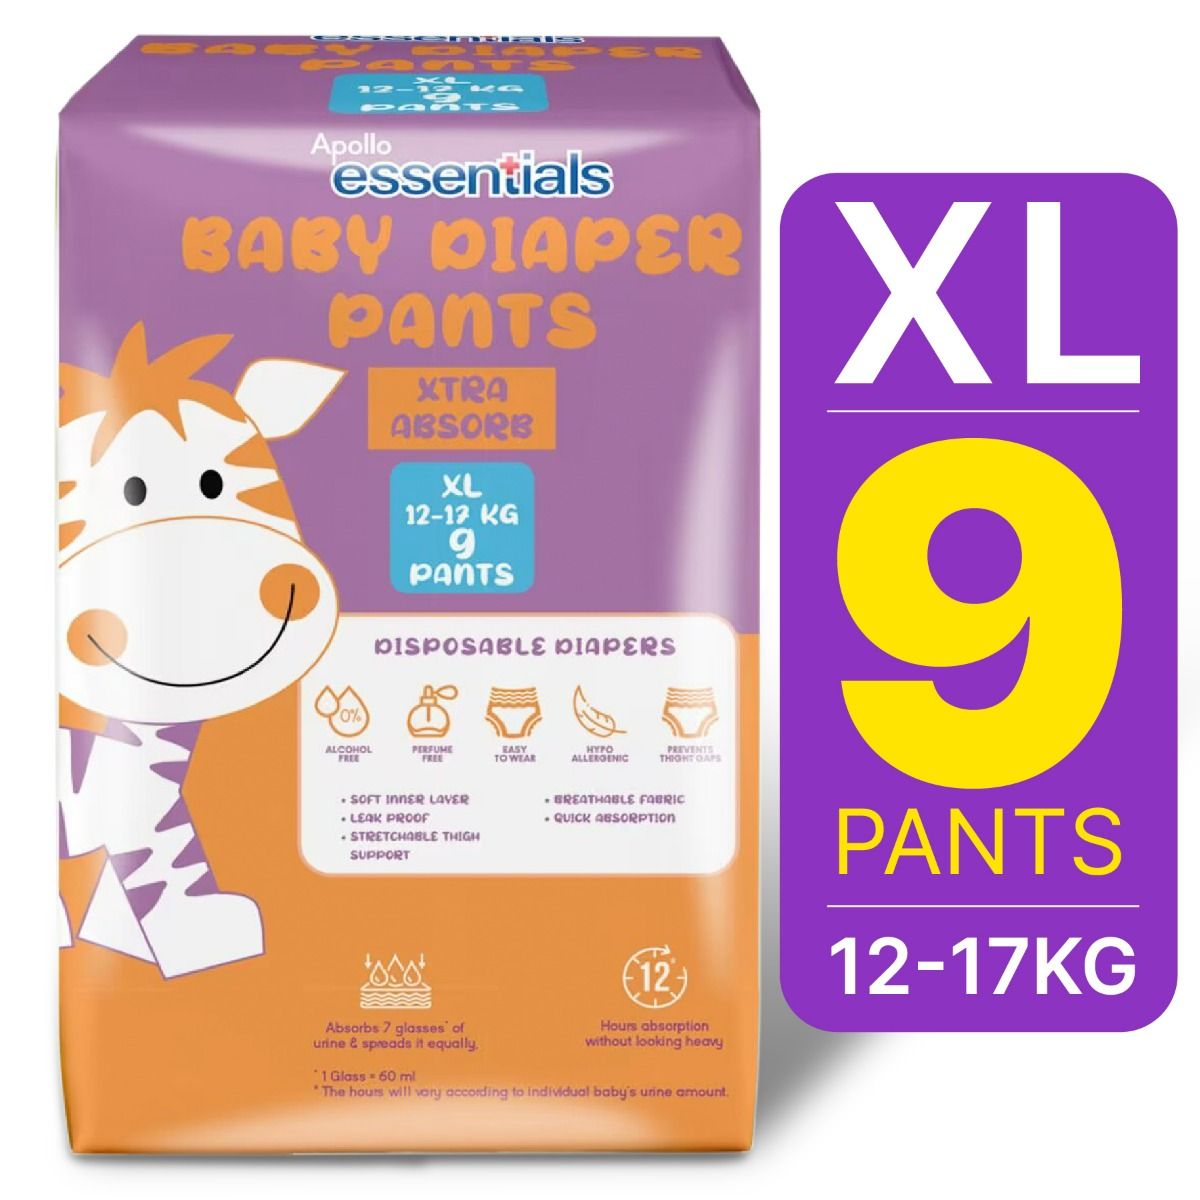 Apollo Essentials Extra Absorb Baby Diaper Pants XL, 24 Count Price, Uses,  Side Effects, Composition - Apollo Pharmacy